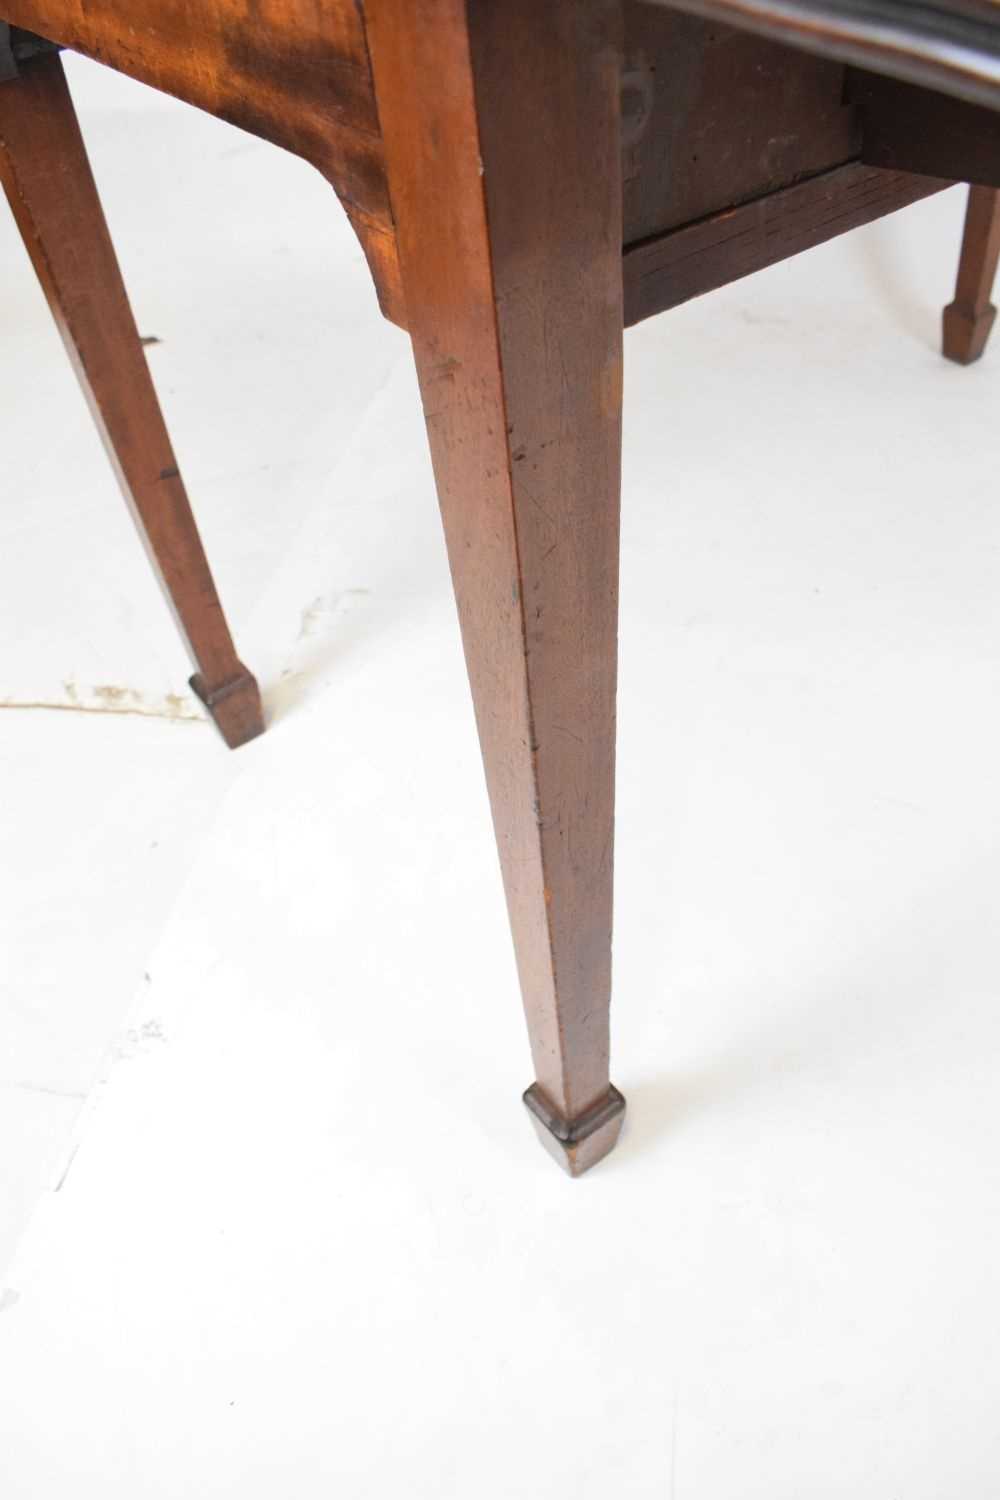 Mahogany drop leaf occasional/dining table - Image 3 of 5